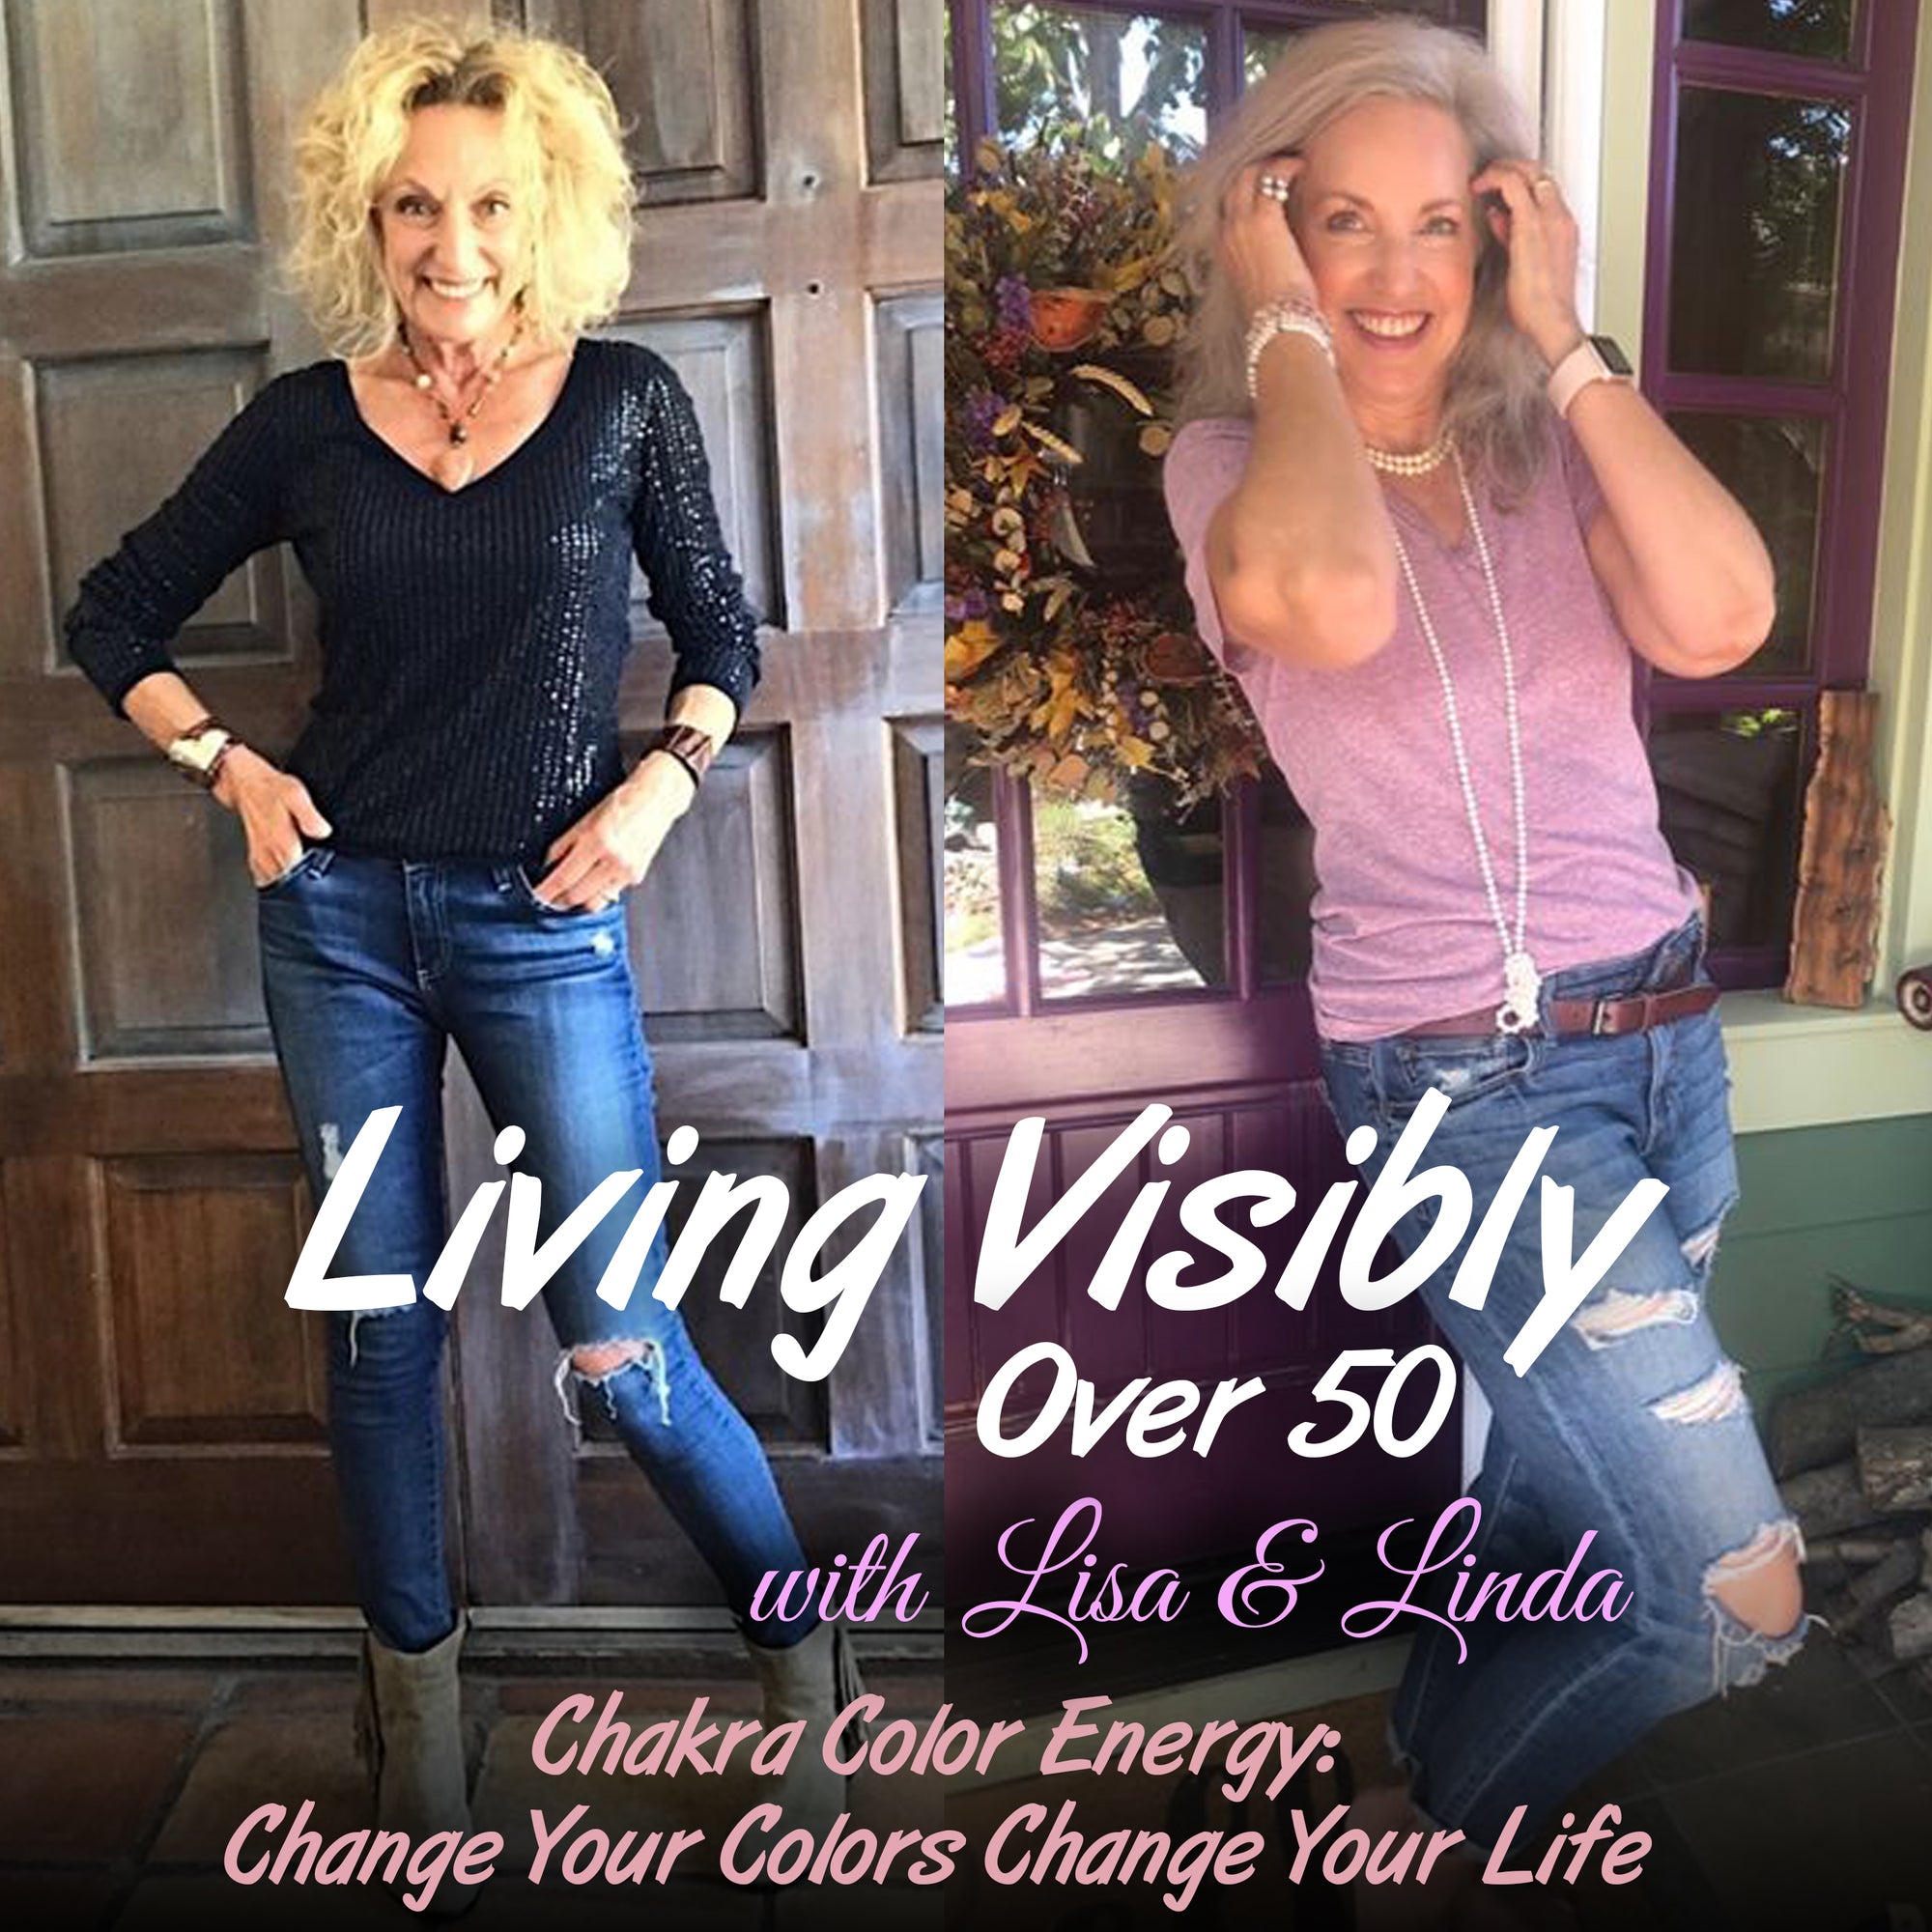 living visibly over 50 chakra color energy for beauty and style